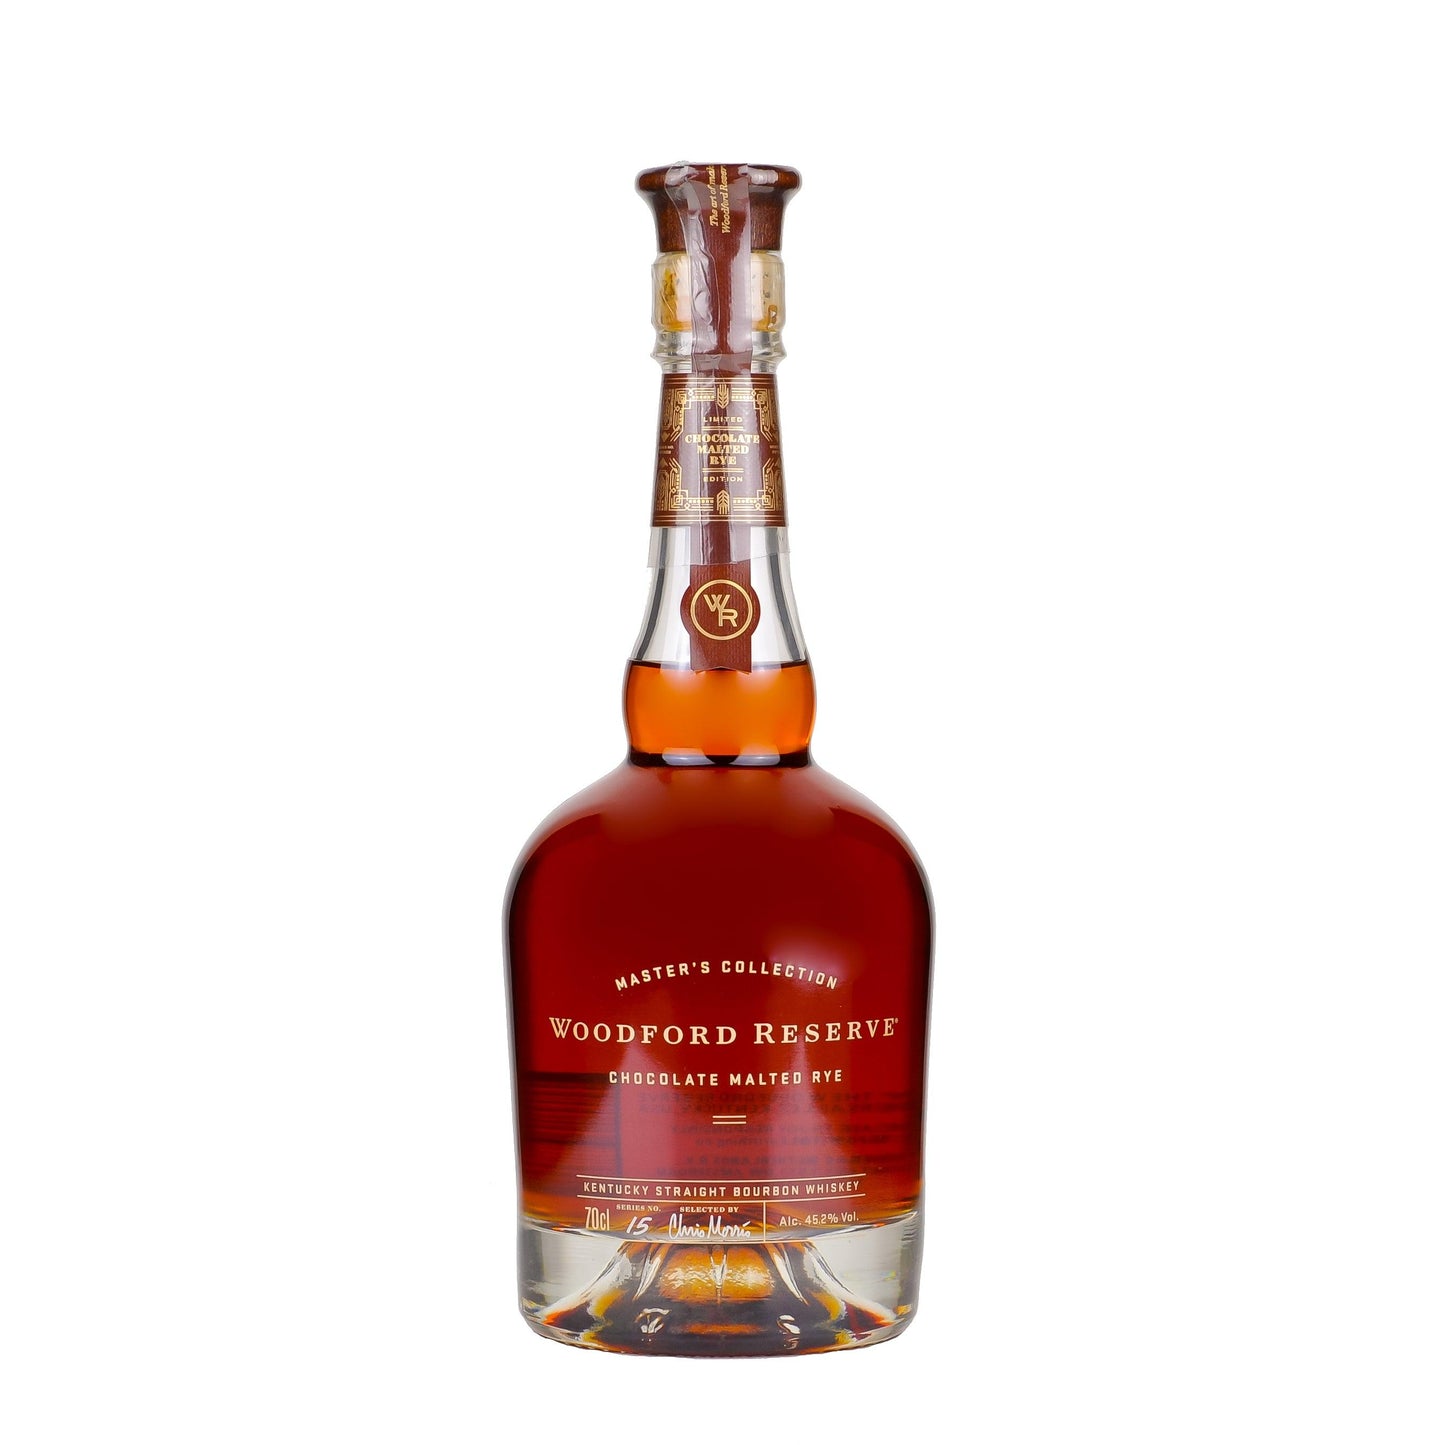 Woodford Reserve Chocolate Malted Rye - Whisky Grail